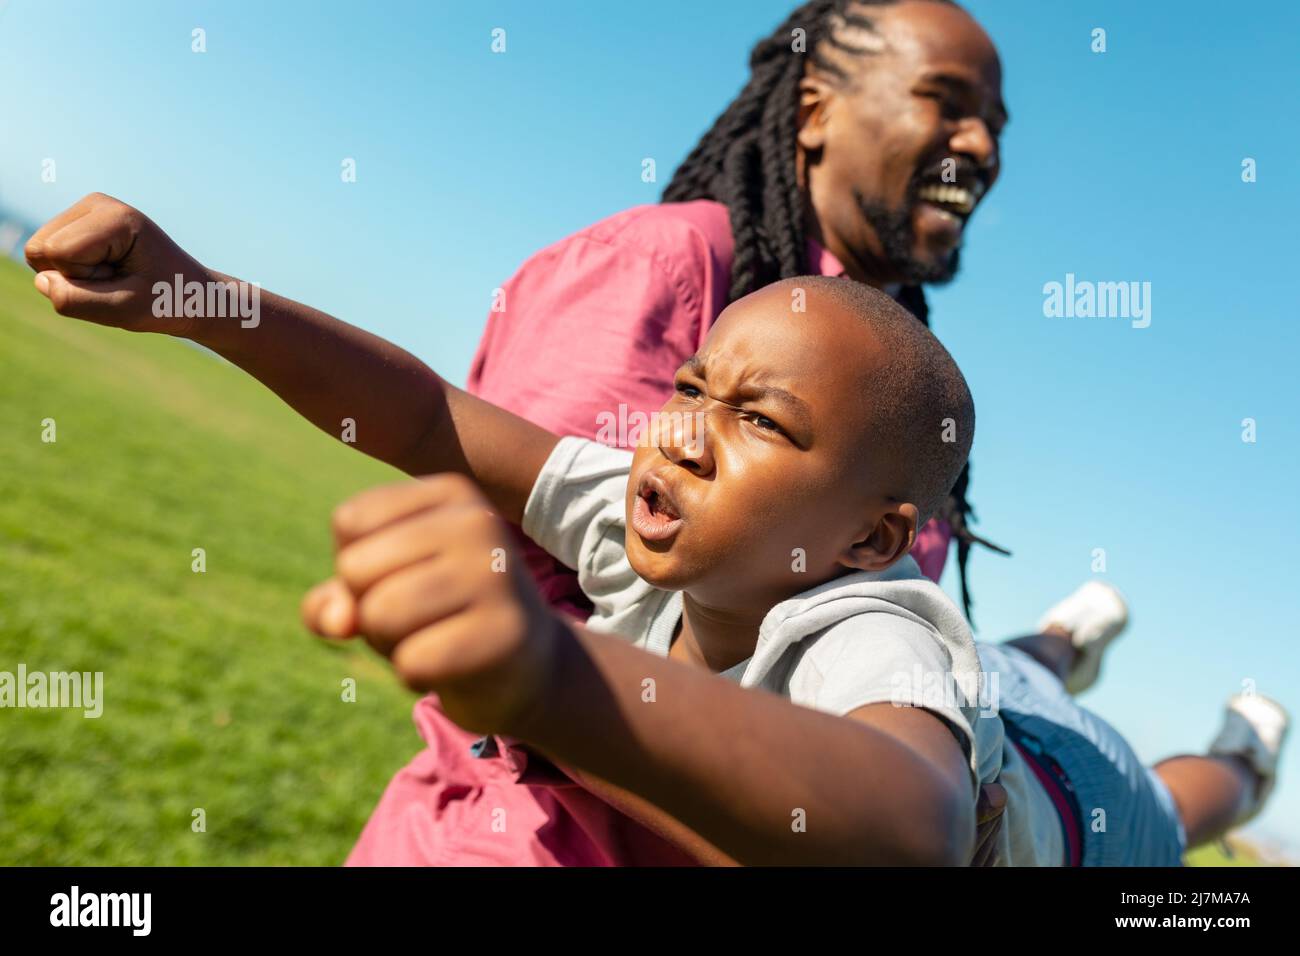 African american father carrying son while boy imitating as superhero flying on sunny day Stock Photo